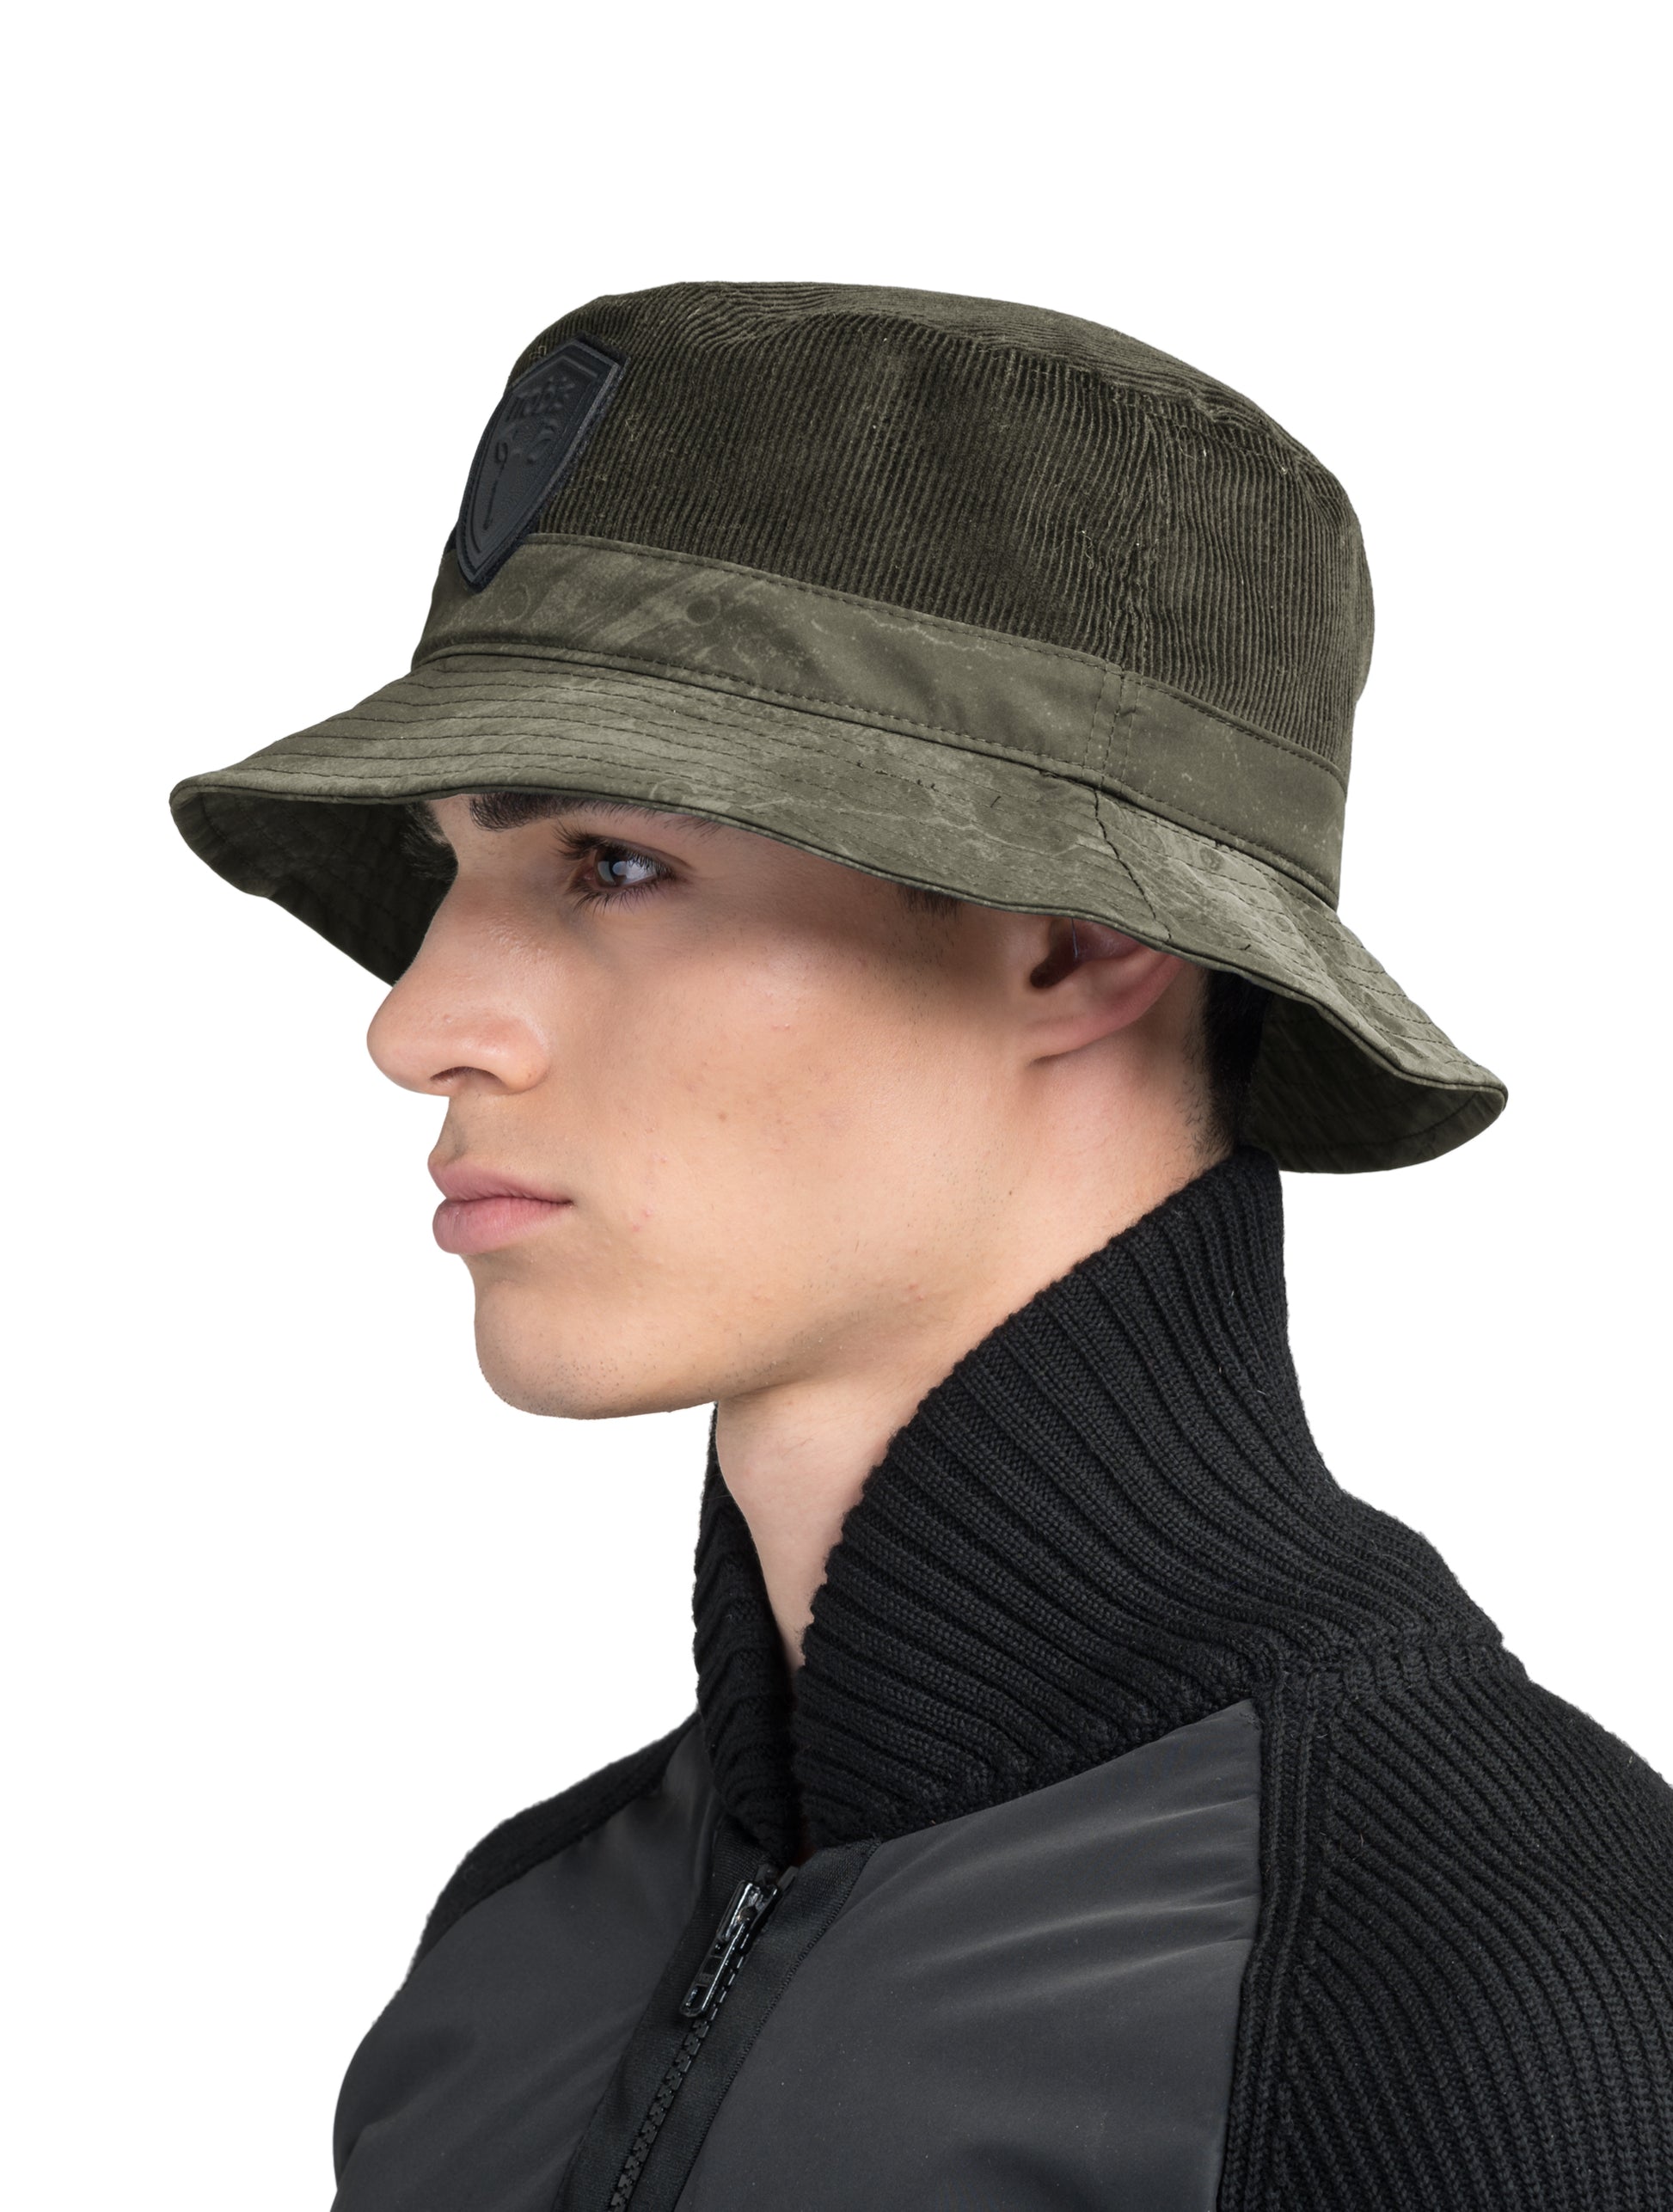 Kaia Unisex Tailored Bucket Hat in a 100% cotton corduroy and 3-ply micro denier fabrication, unstructured crown, black leather Nobis shield logo on crown front, and small flap pocket on the right side crown, in Fatigue